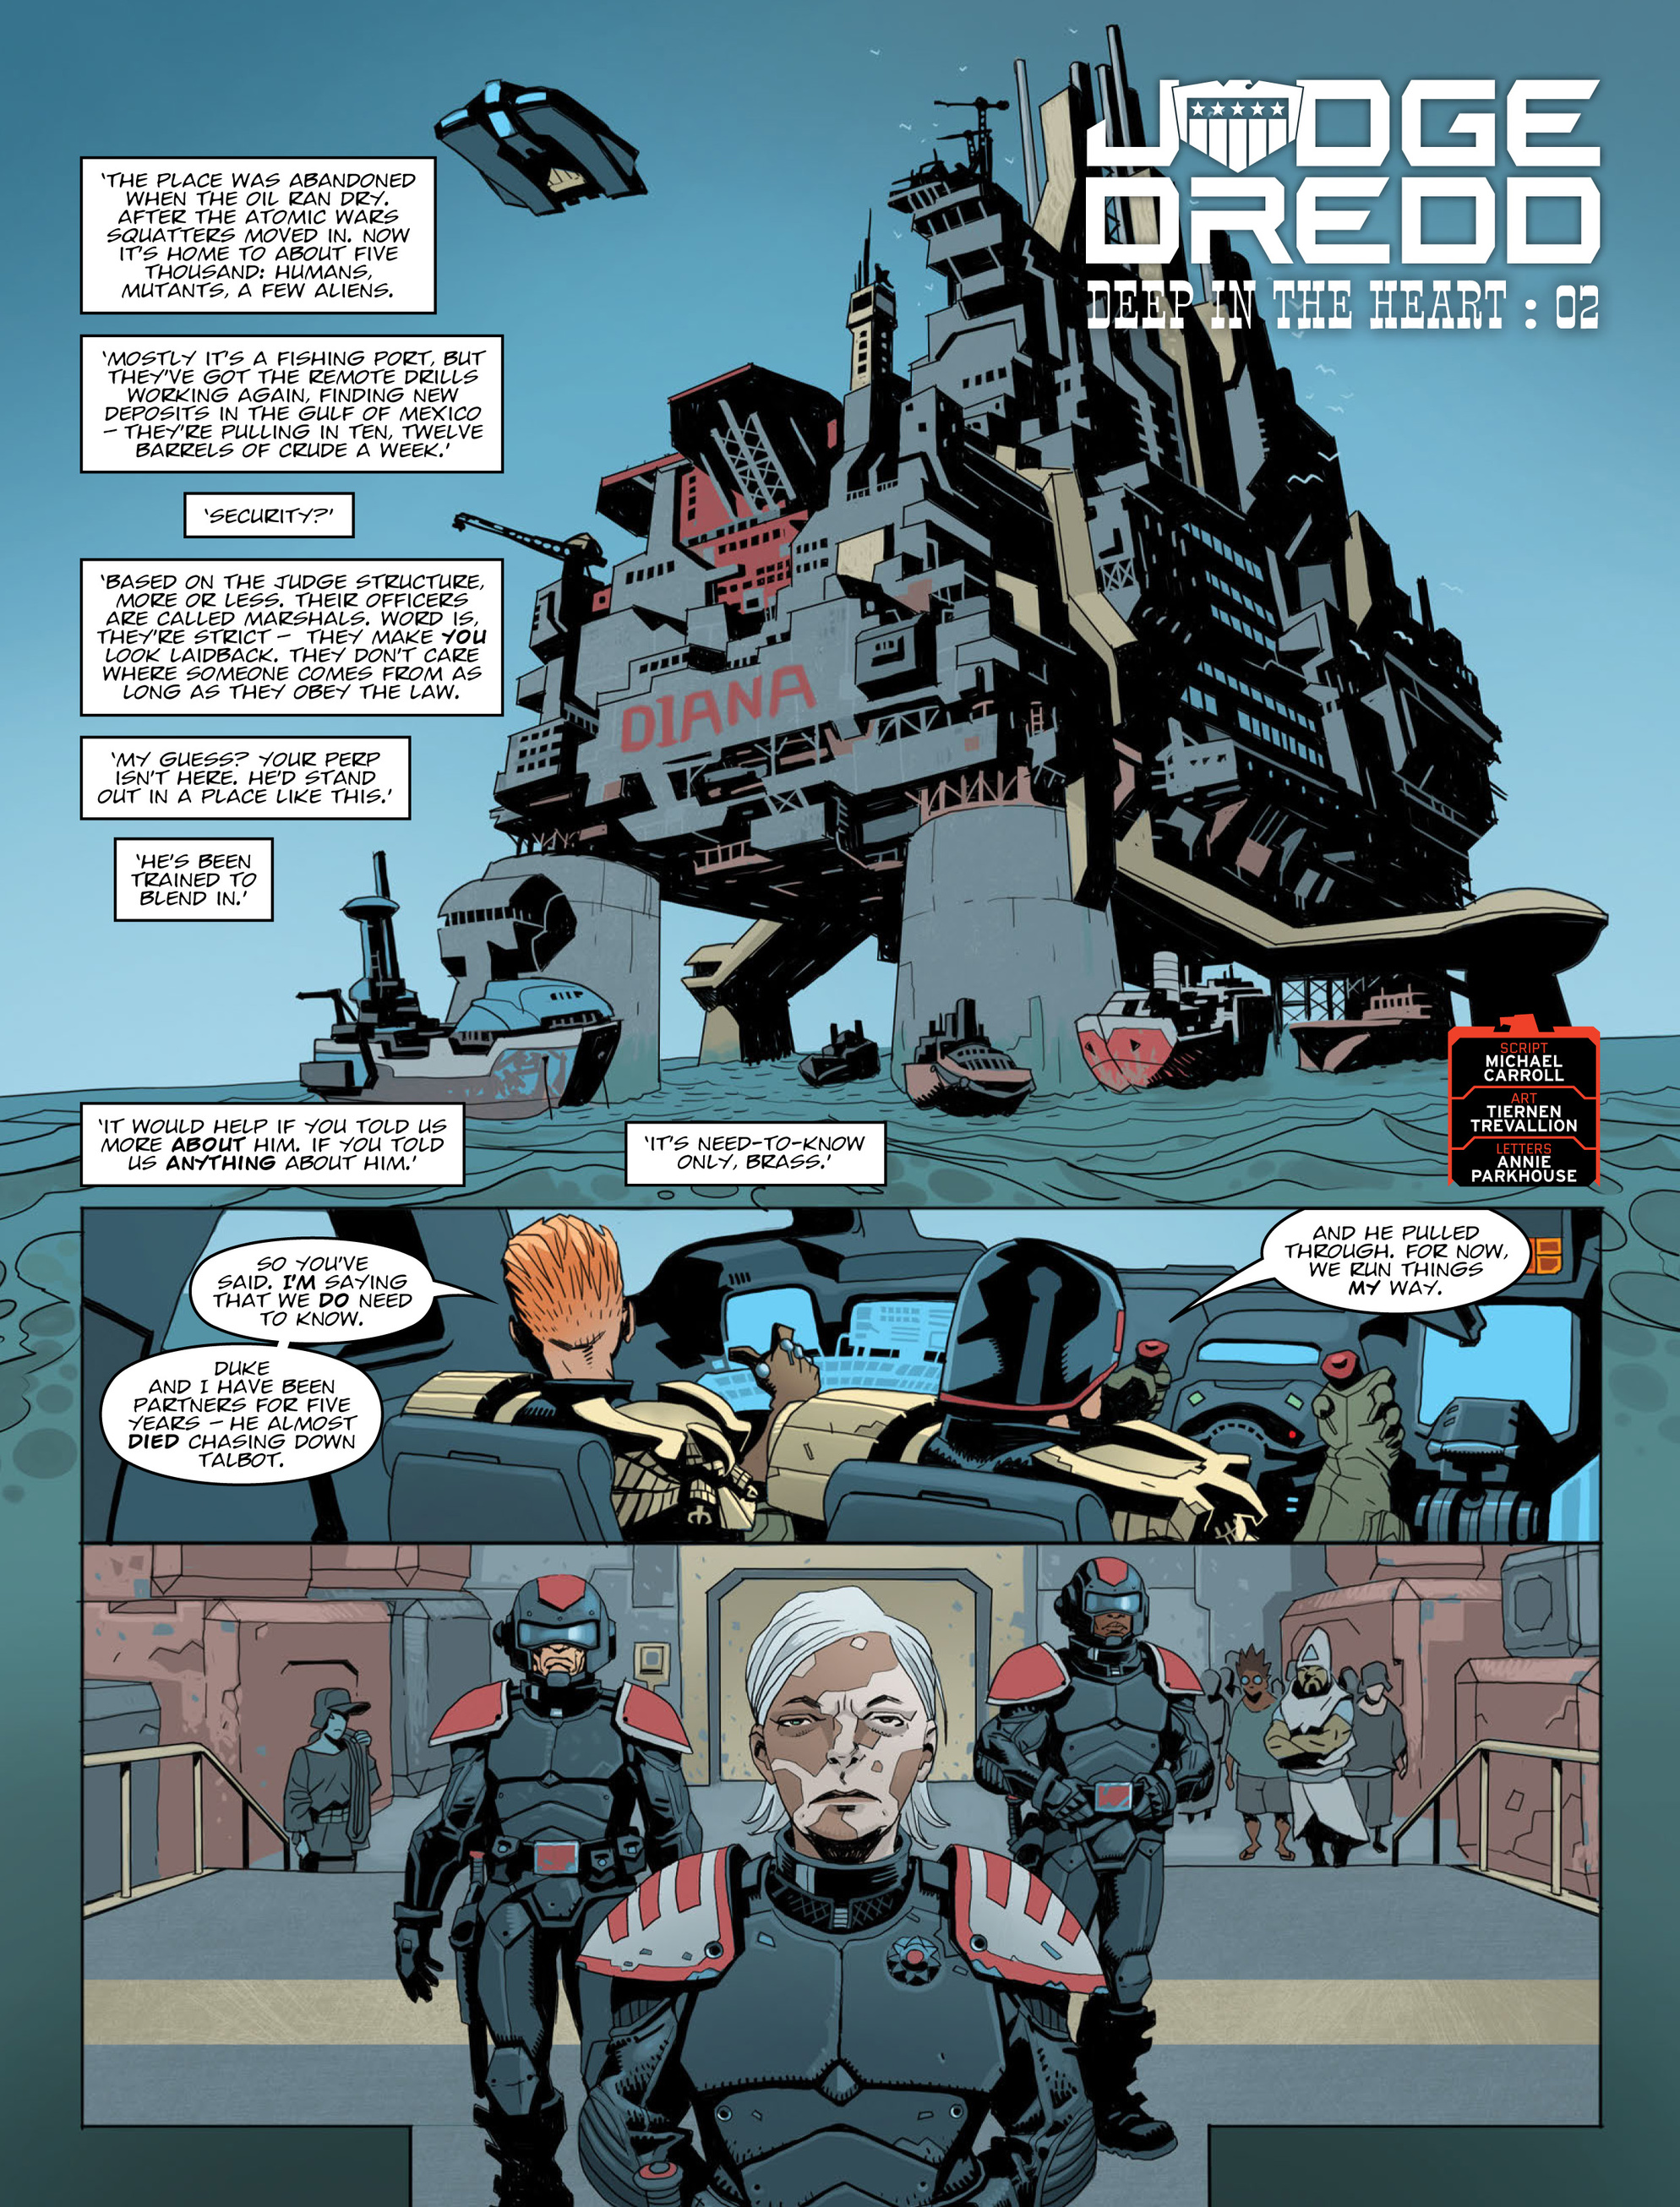 2000 AD: Chapter 2013 - Page 3